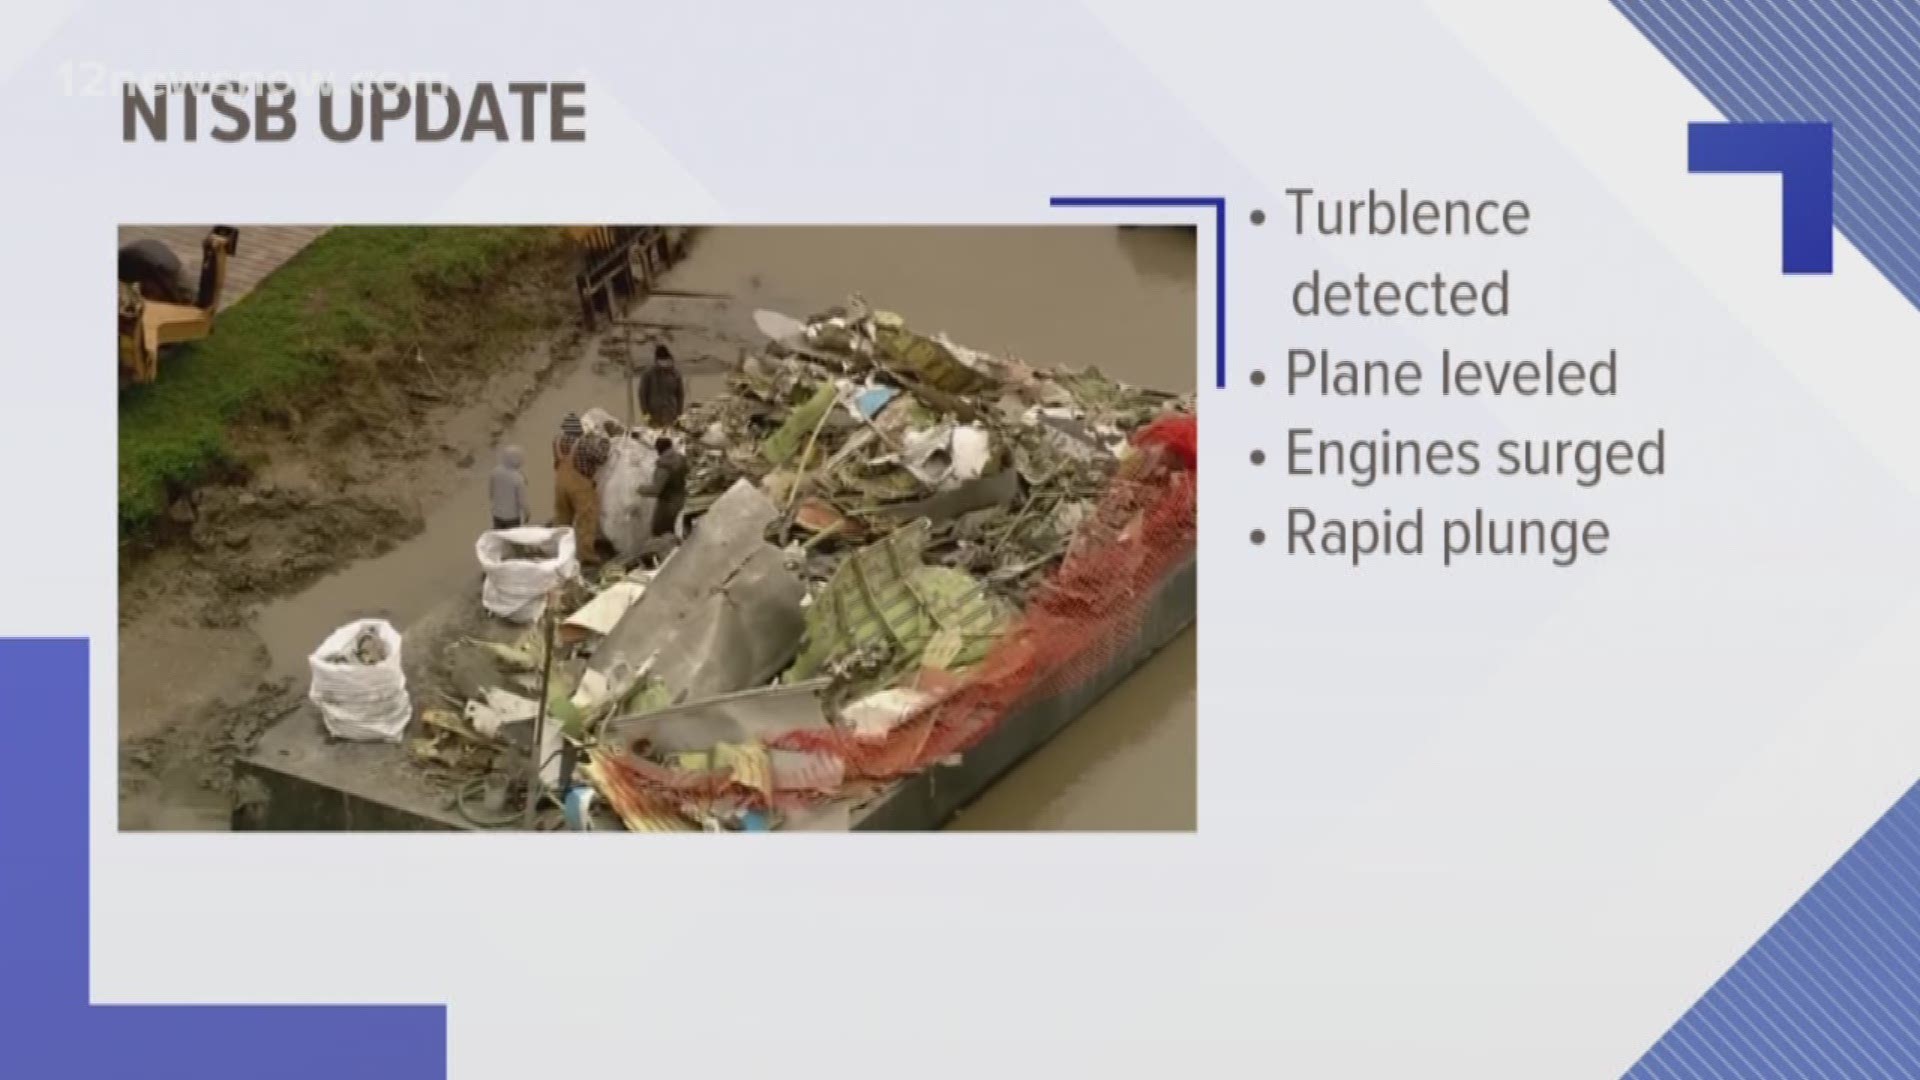 Turbulence does seem to have been a factor according to the NTSB.